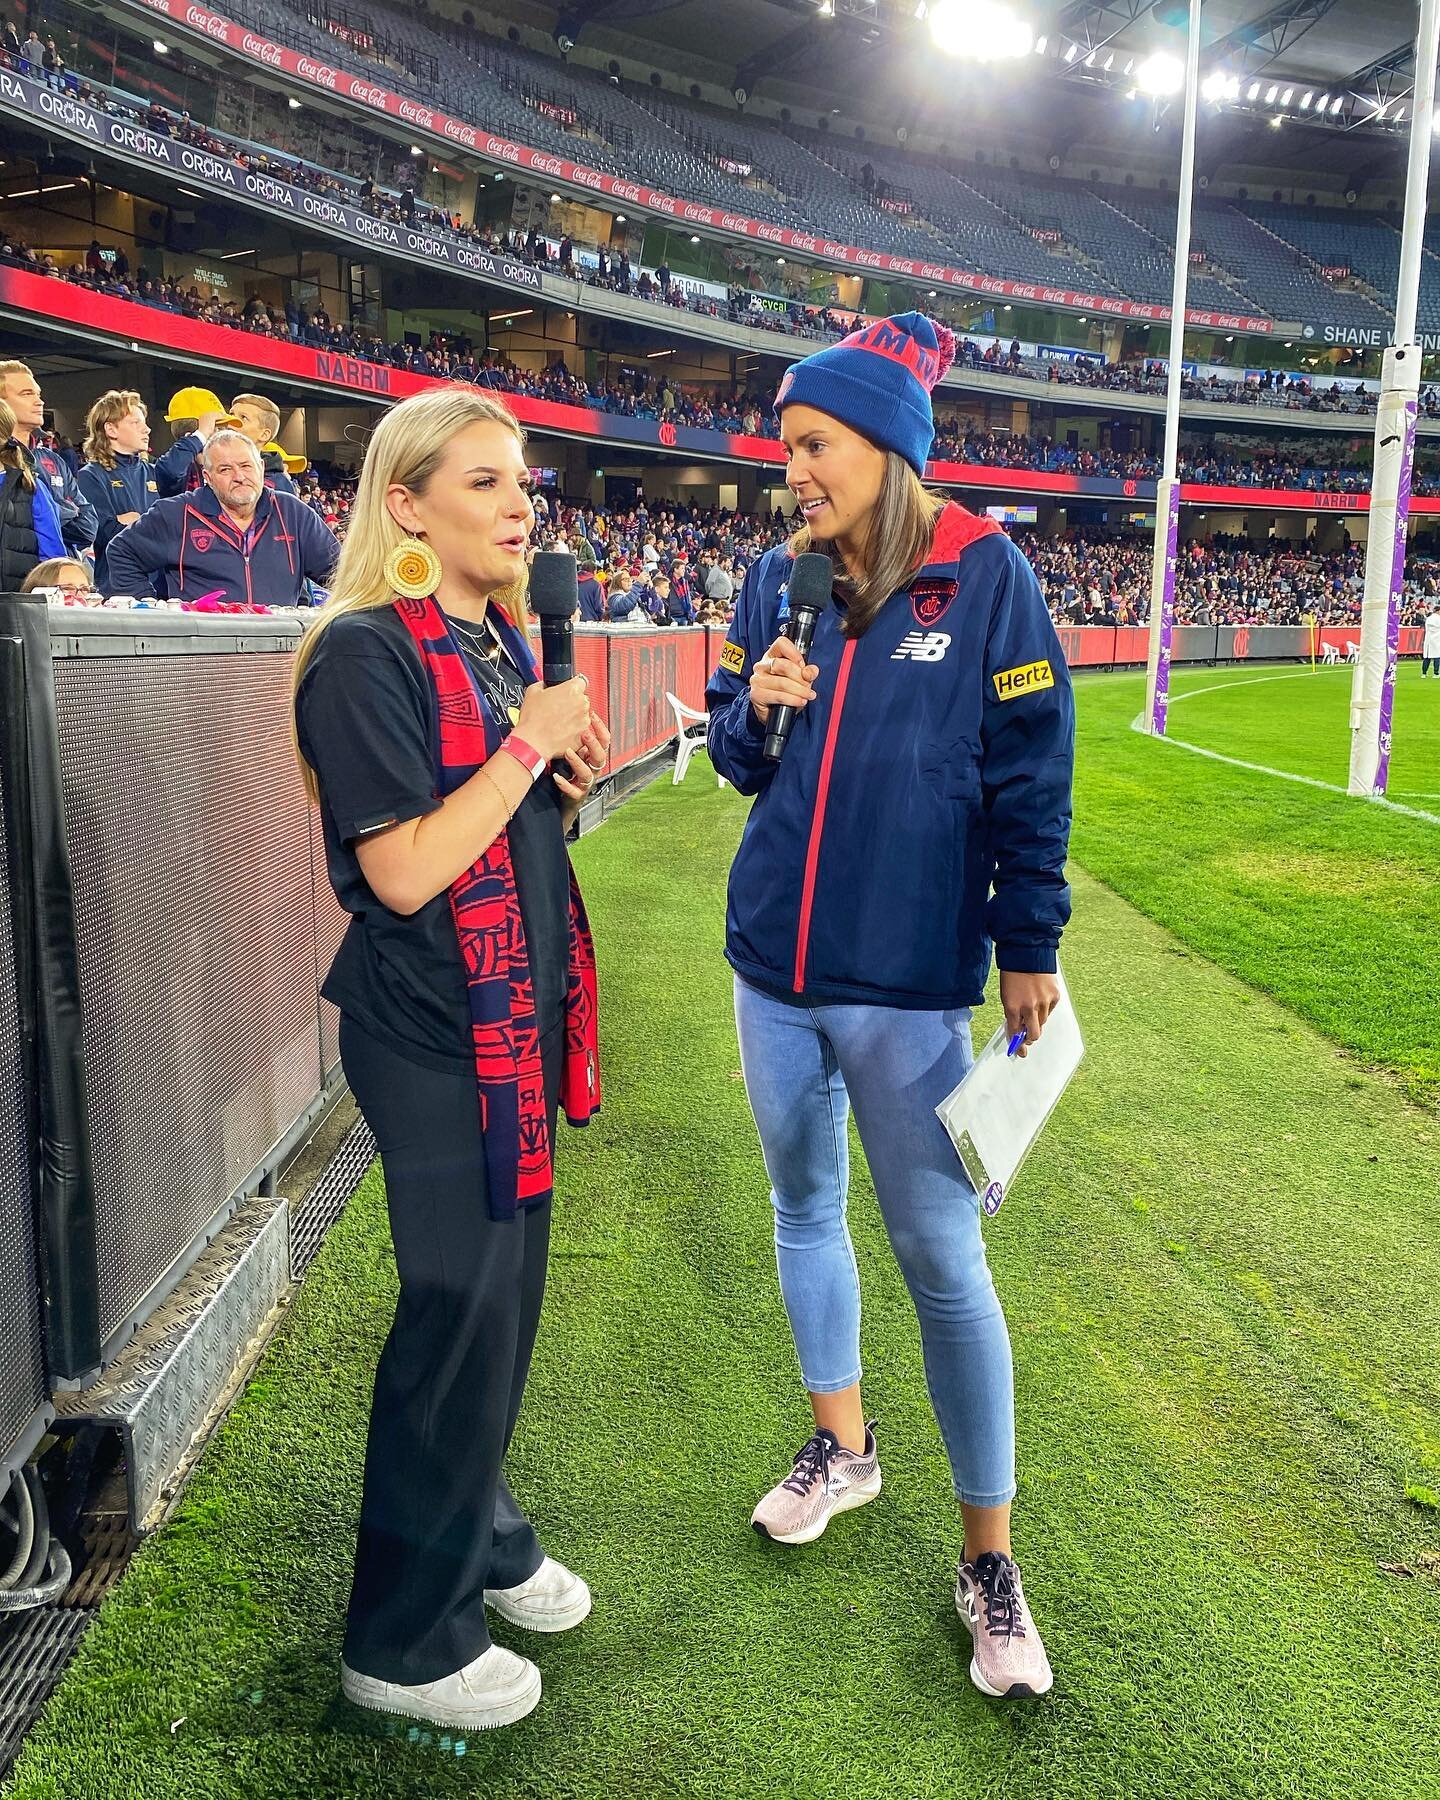 An absolute privilege to MC this afternoons match with the one and only Russell Robertson ❤️💙 Not the result we wanted tonight but footy is always more than just a win or a loss. @kyyanicholsonw what a beautiful jumper you have made for the Narrm Fo